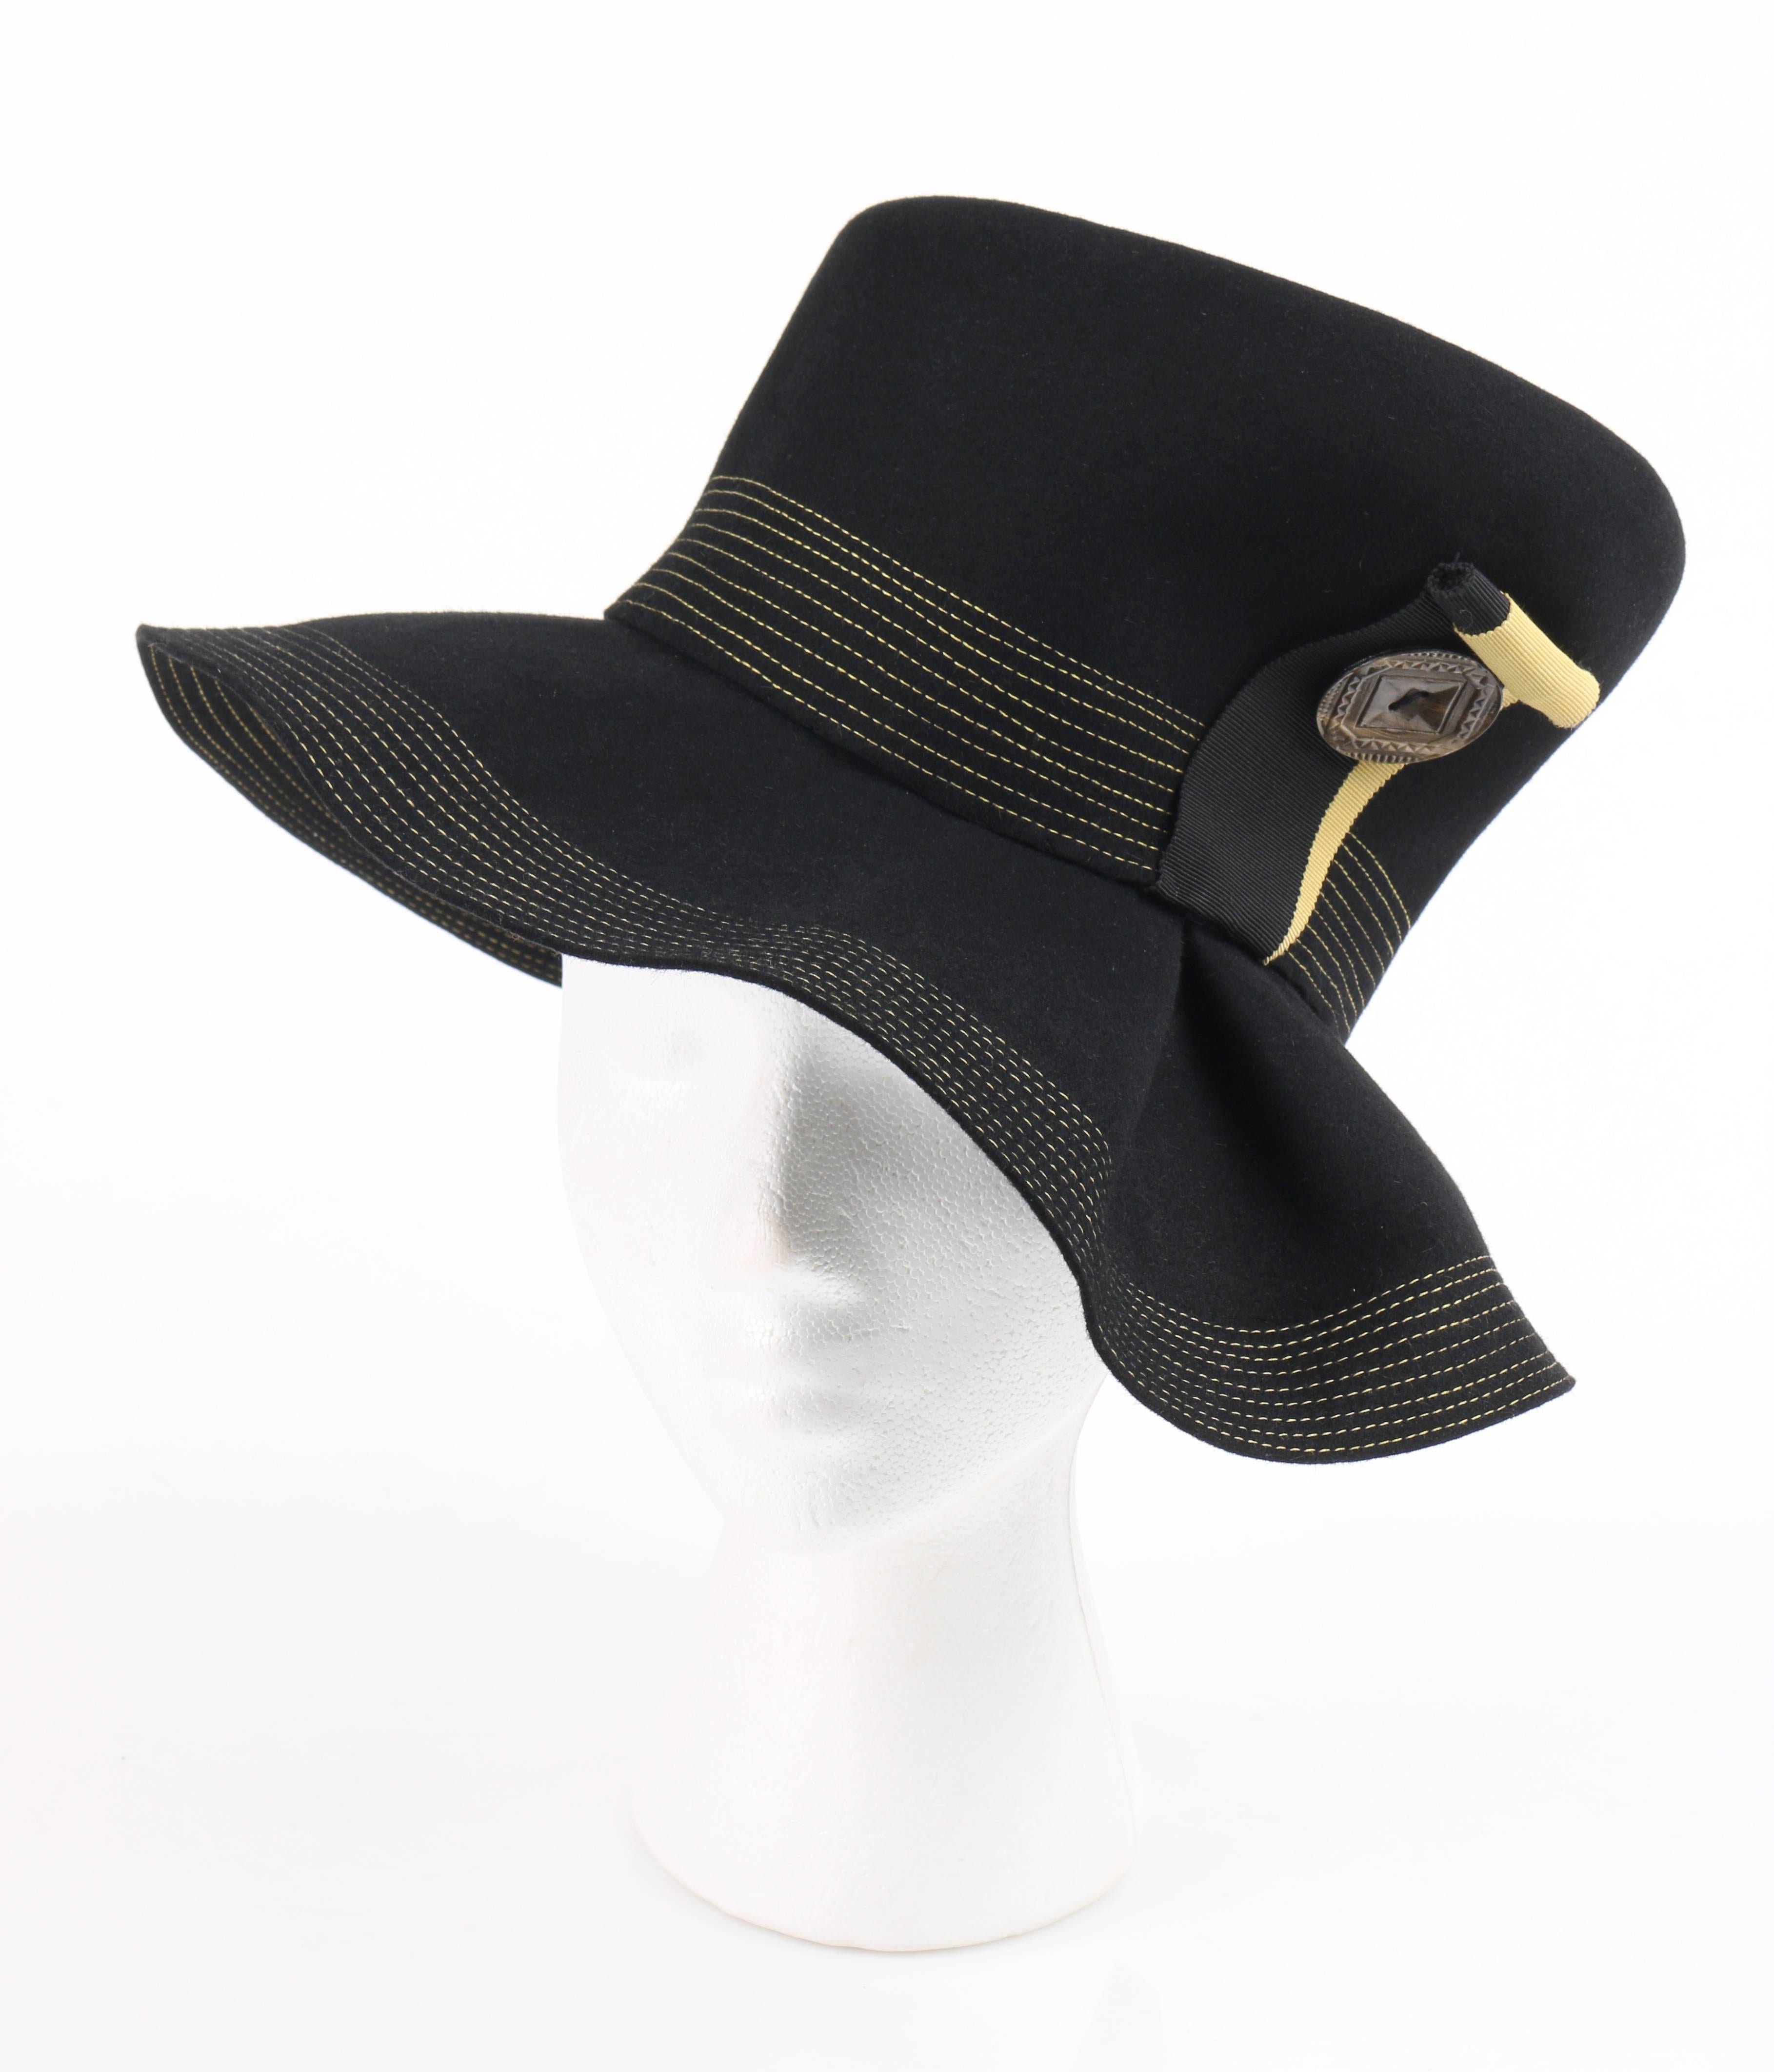 Vintage Norman Durand Original c.1940's black fur felt asymmetrical sculptural hat. Black fur felt body with yellow contrasting top stitch around edge of brim and crown of hat. Wide slouched brim with single inverted box pleat at left front. Tall